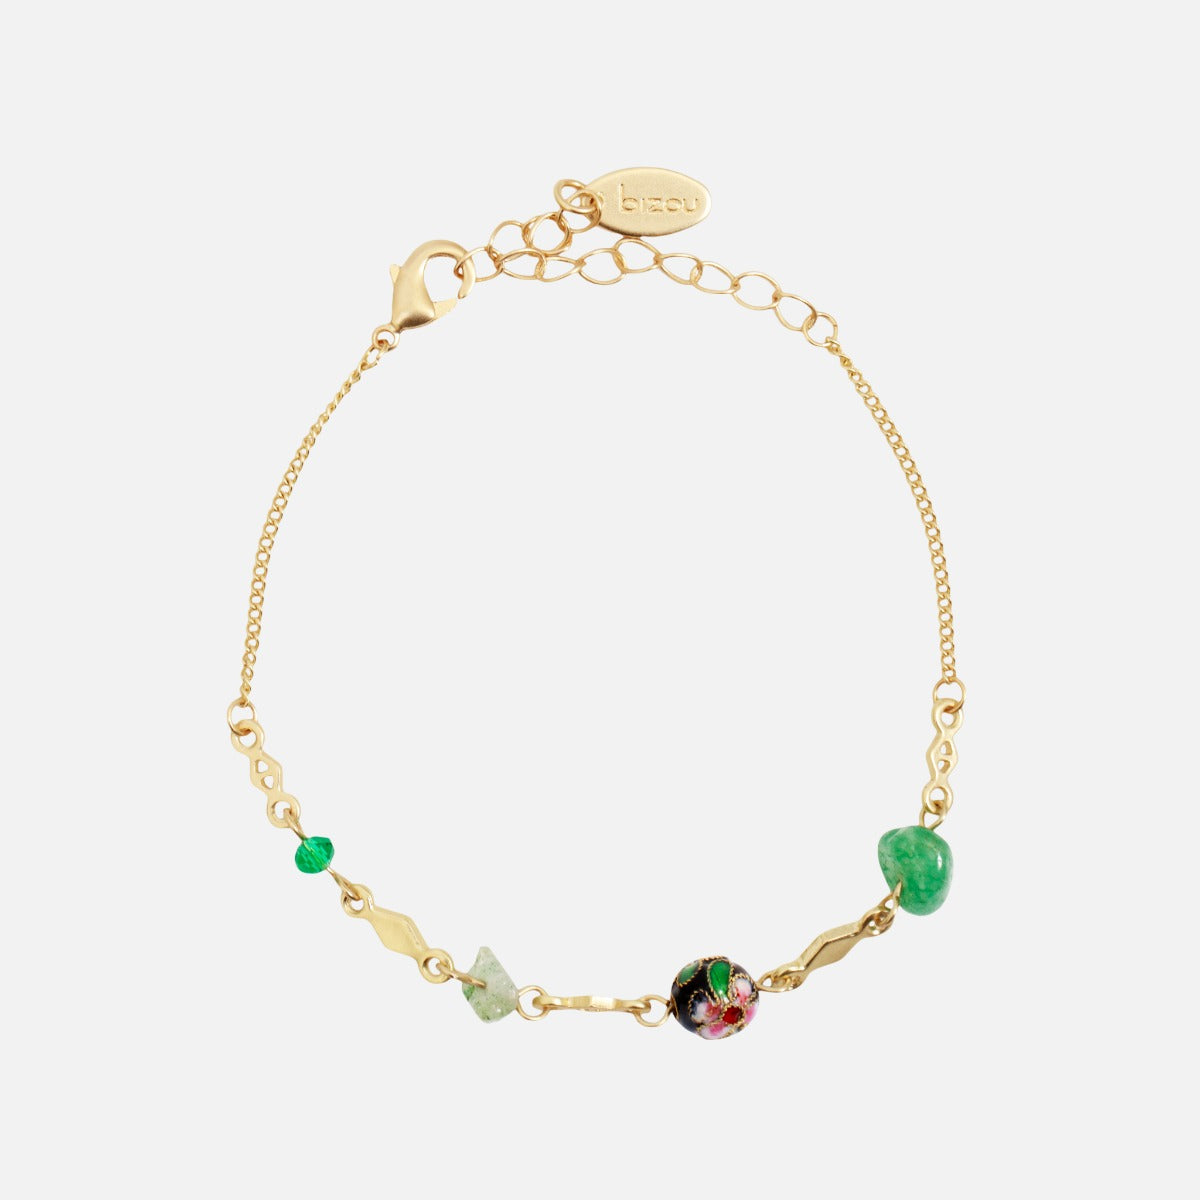 Set of two golden bracelets with green beads